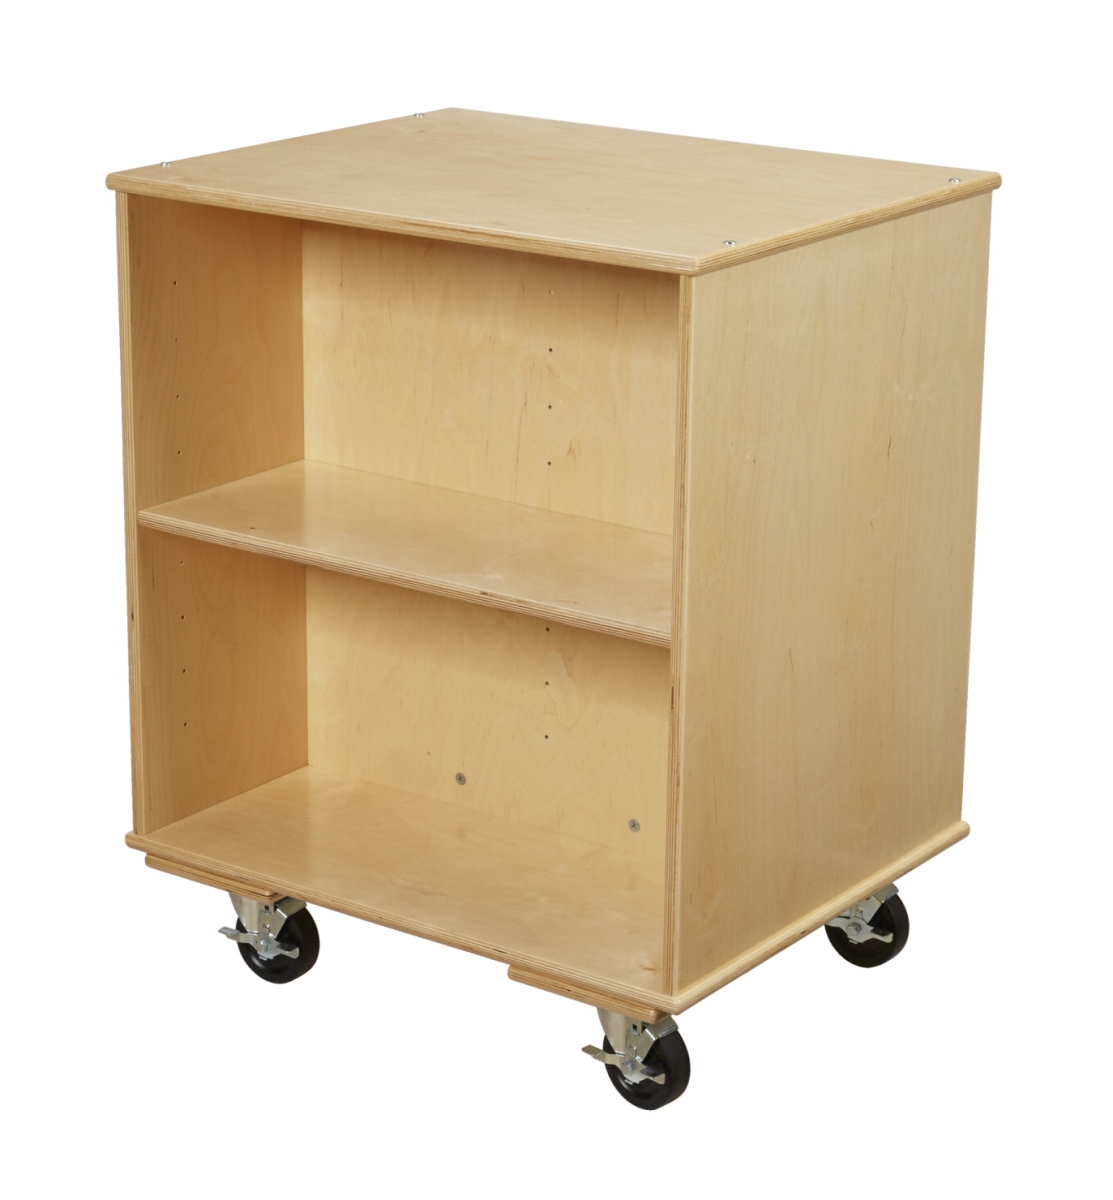 1587701 Small Mobile Storage With Double Side Bookcase, 29.5 X 24 X 36 In.